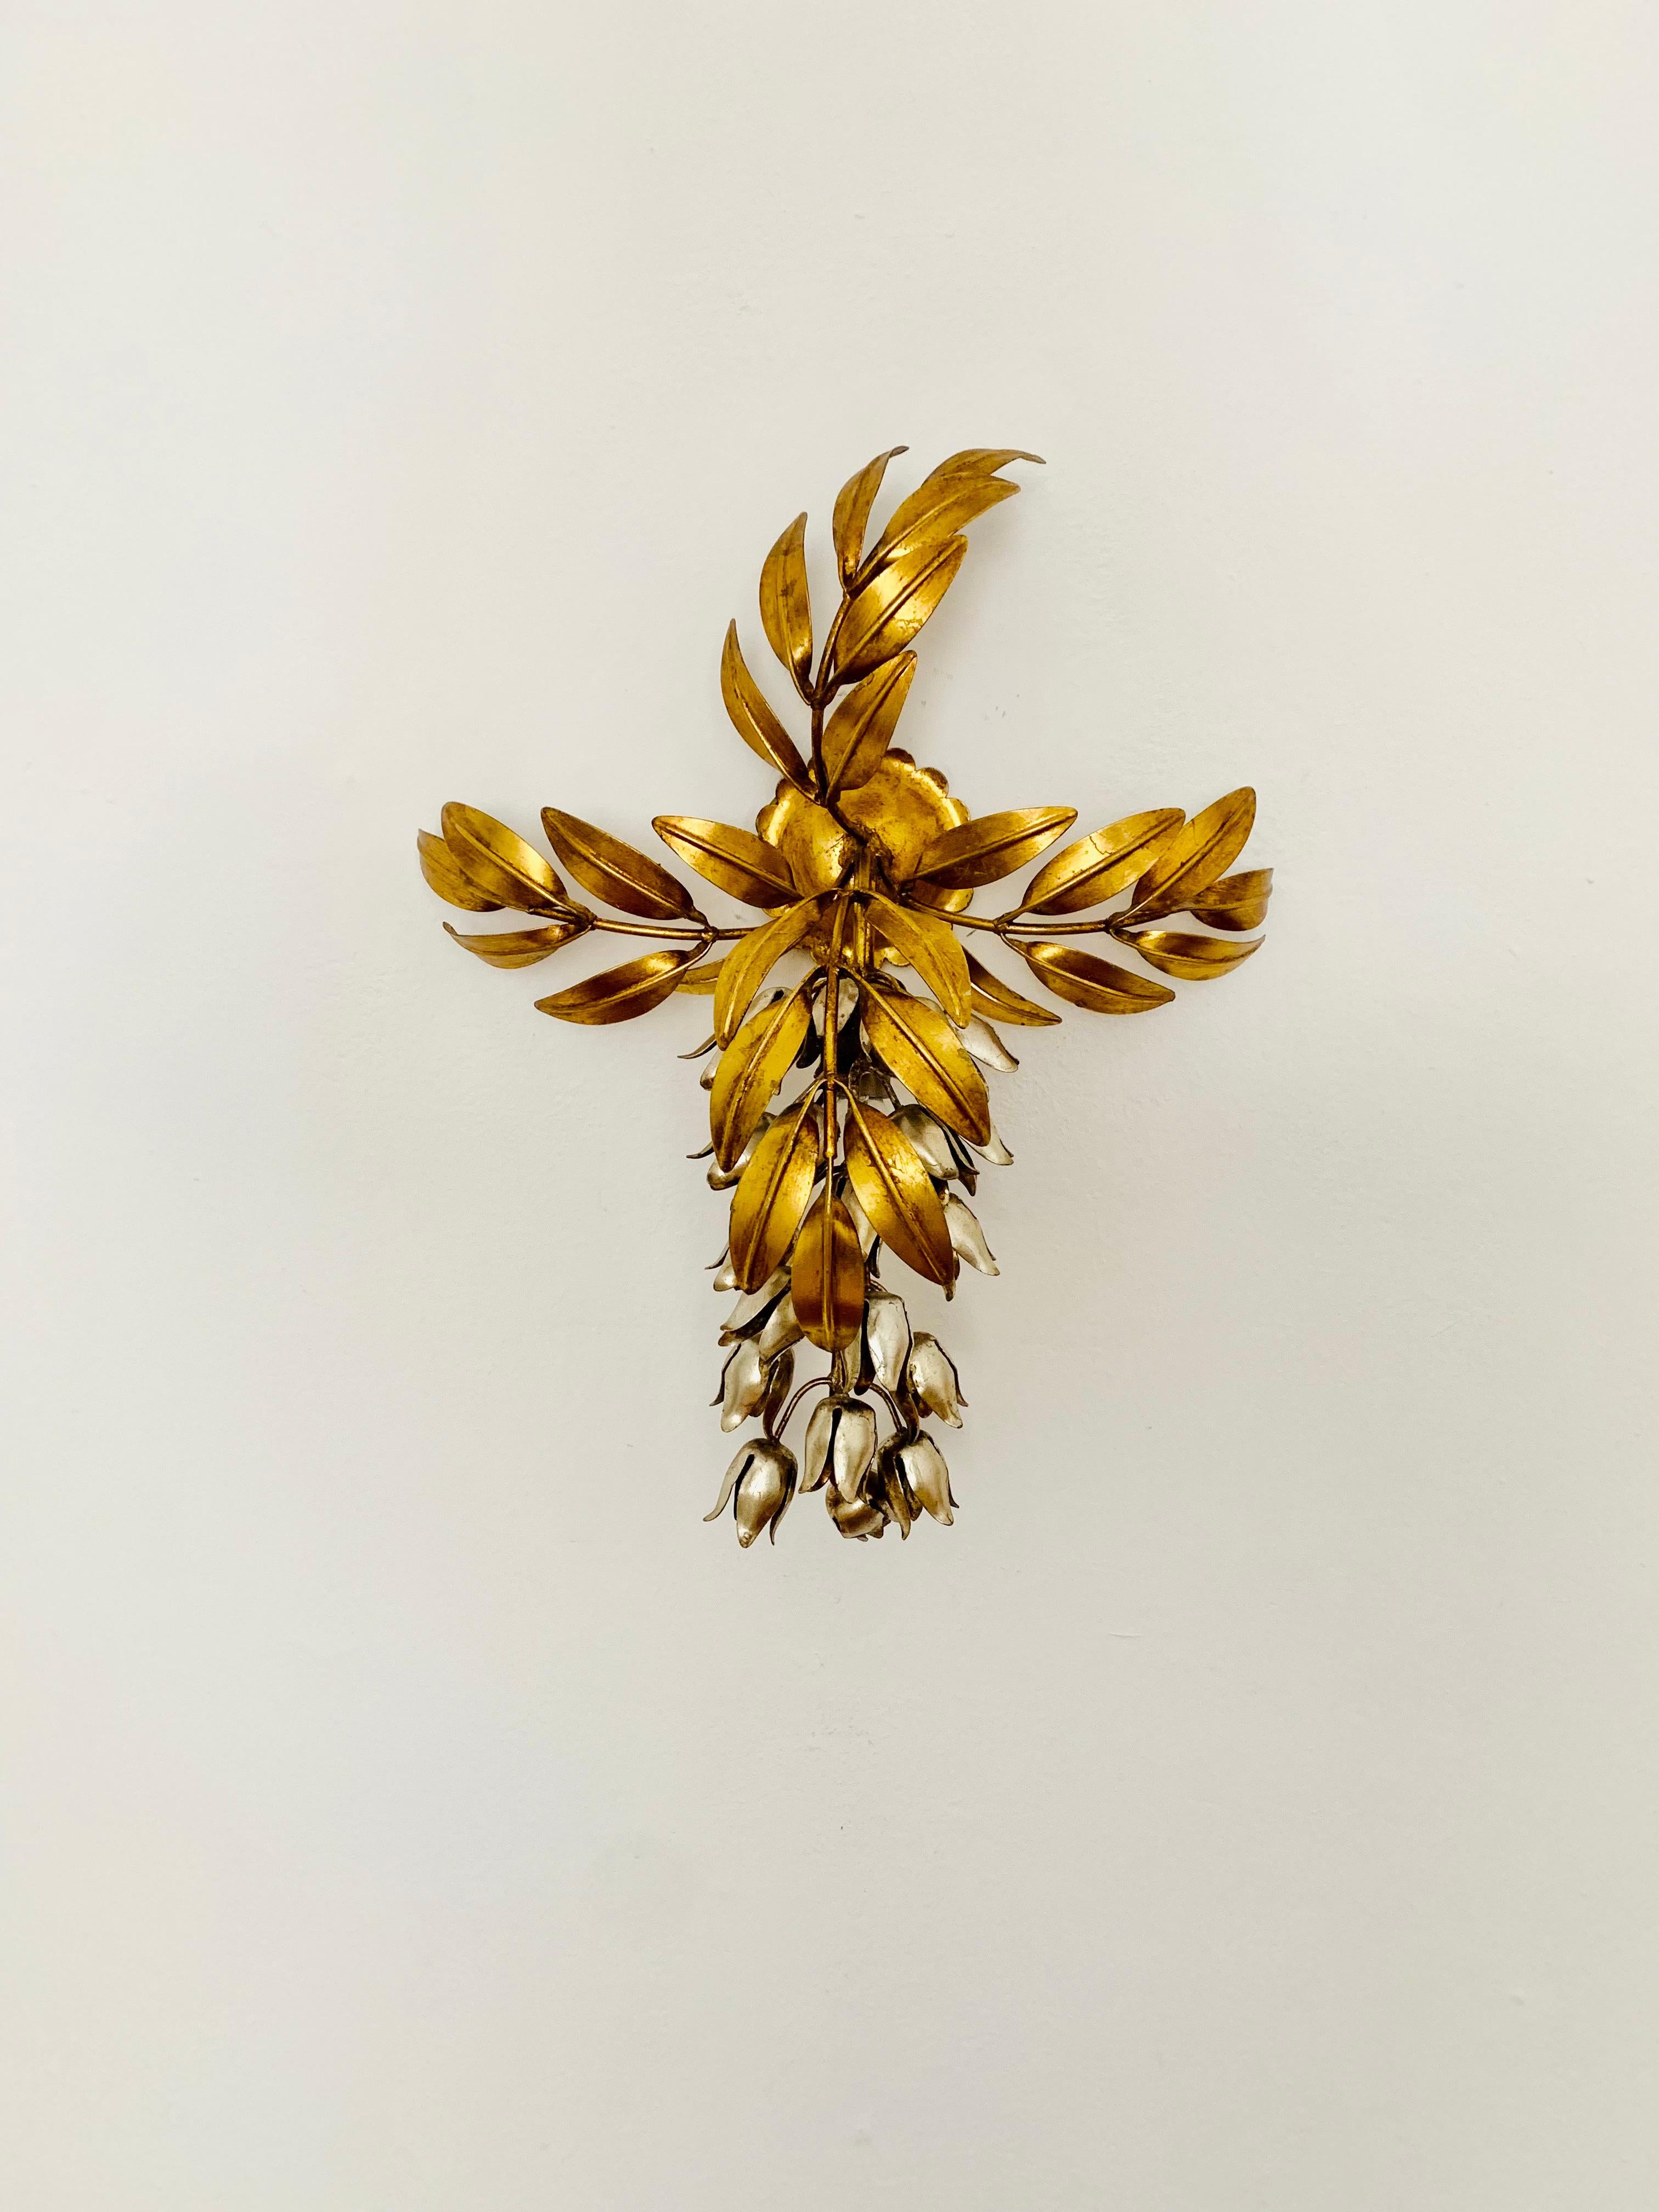 Very beautiful floral wall lamps by Hans Kögl from the 1970s.
Great design and high-quality workmanship.
The leaves and the color combination create a great, very elegant light.

Condition:

Very good vintage condition with slight signs of